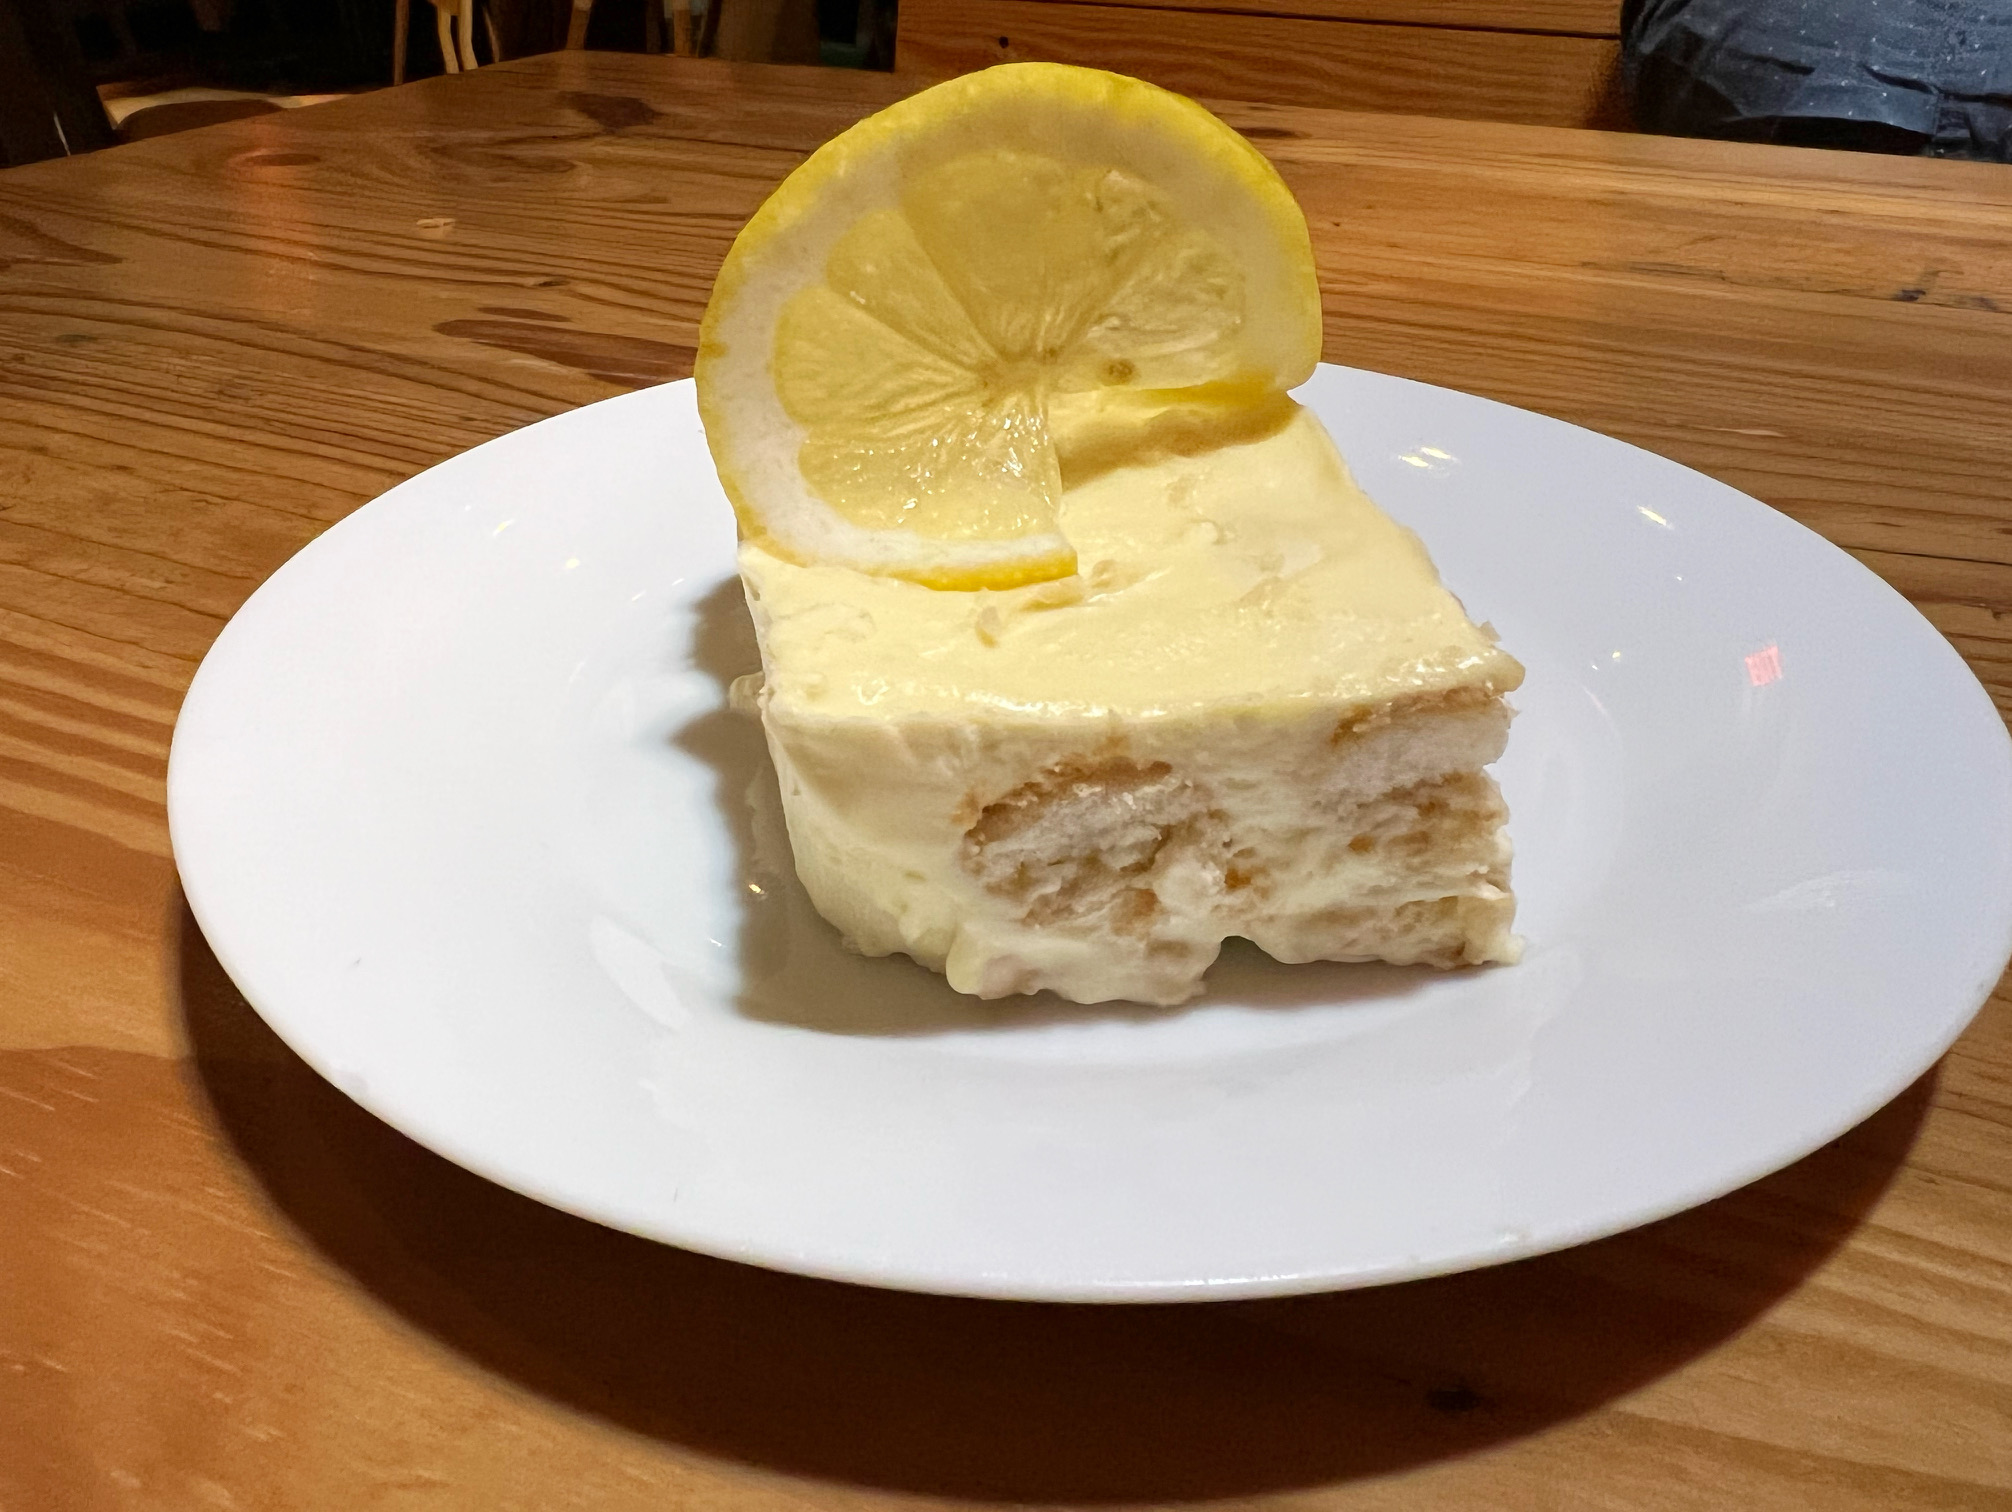 On a white plate, there is a slice of tiramisu topped with a lemon. Photo by Alyssa Buckley.